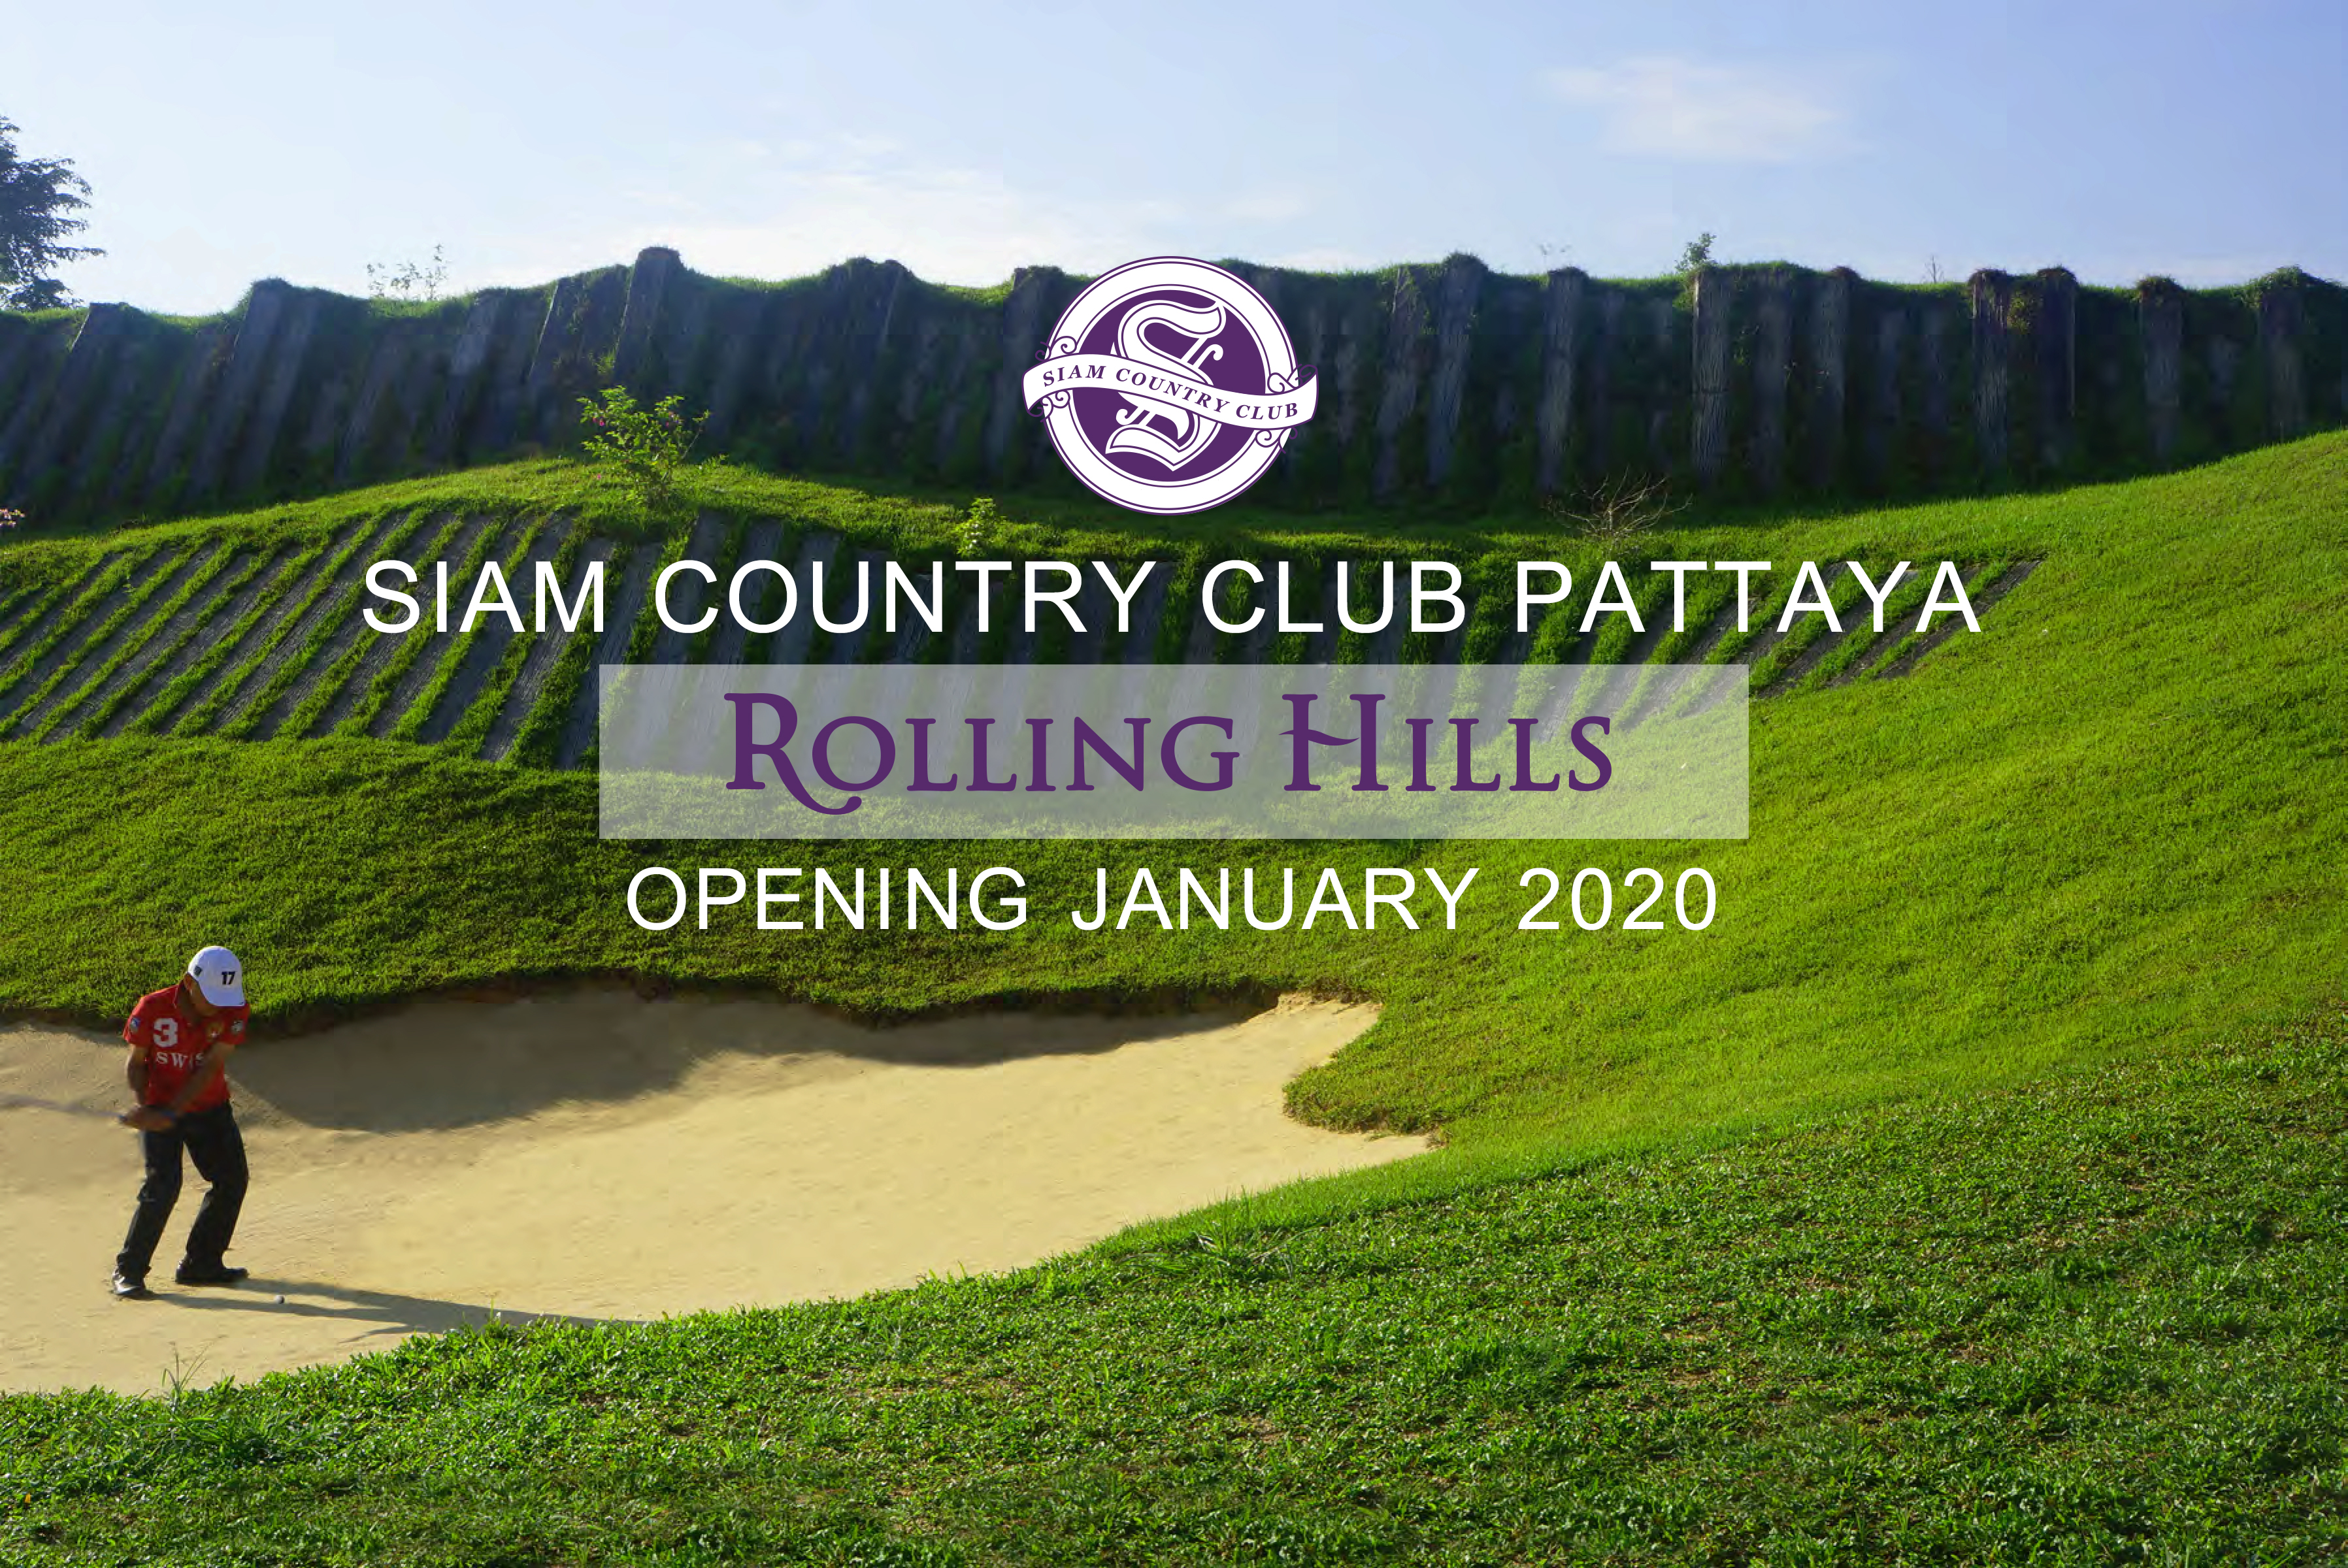 Siam Country Club : Rolling Hills will open in January 2020